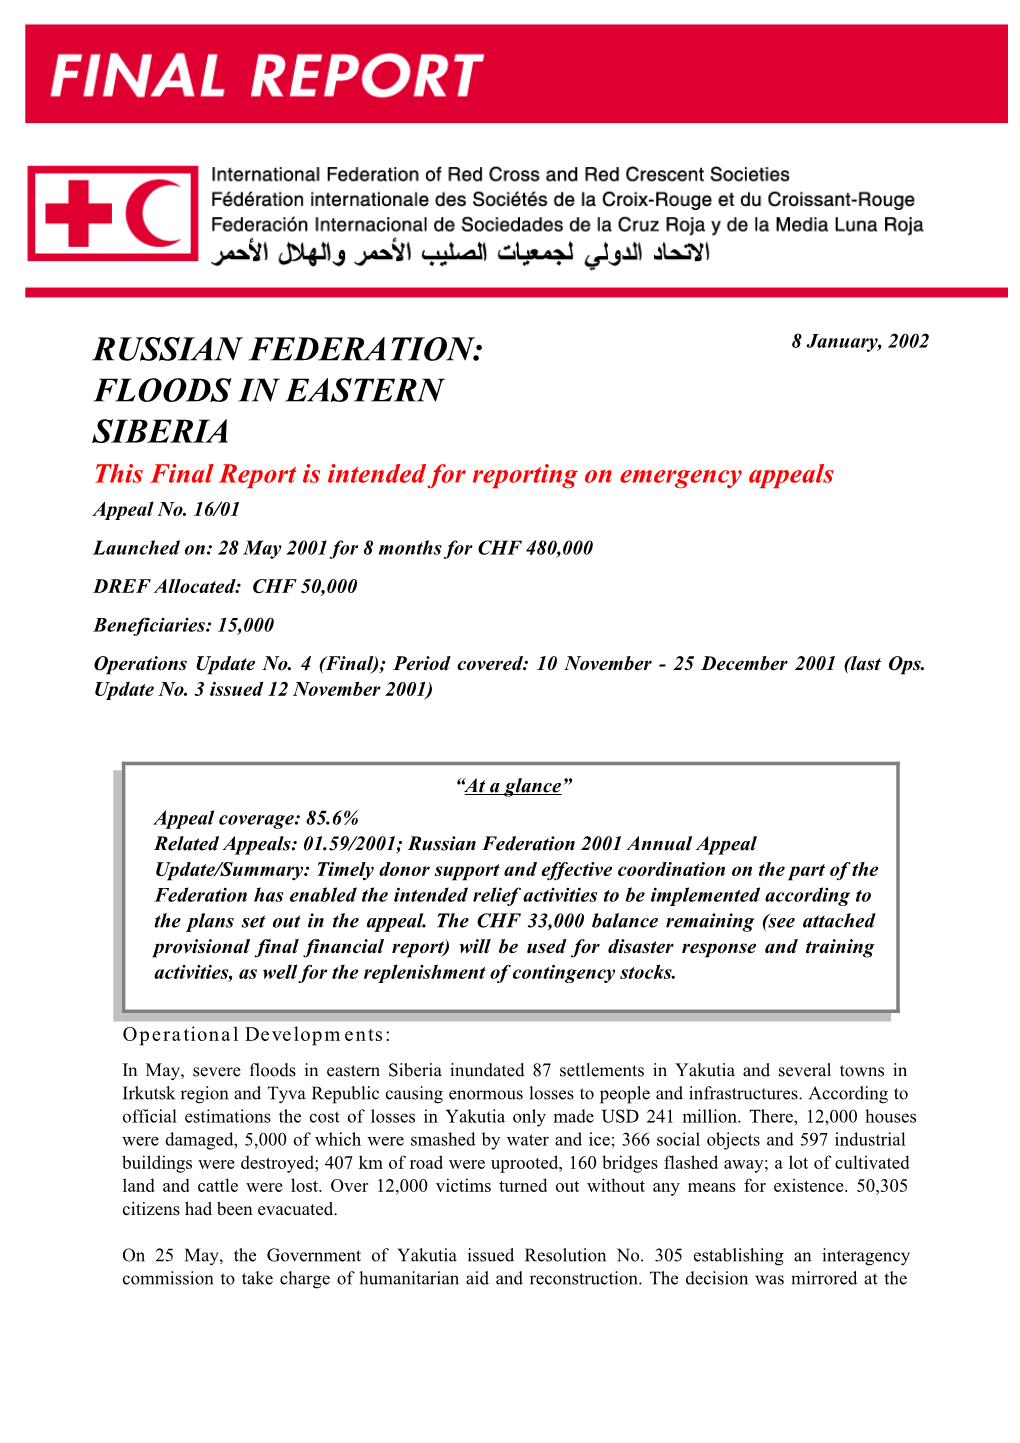 FLOODS in EASTERN SIBERIA This Final Report Is Intended for Reporting on Emergency Appeals Appeal No